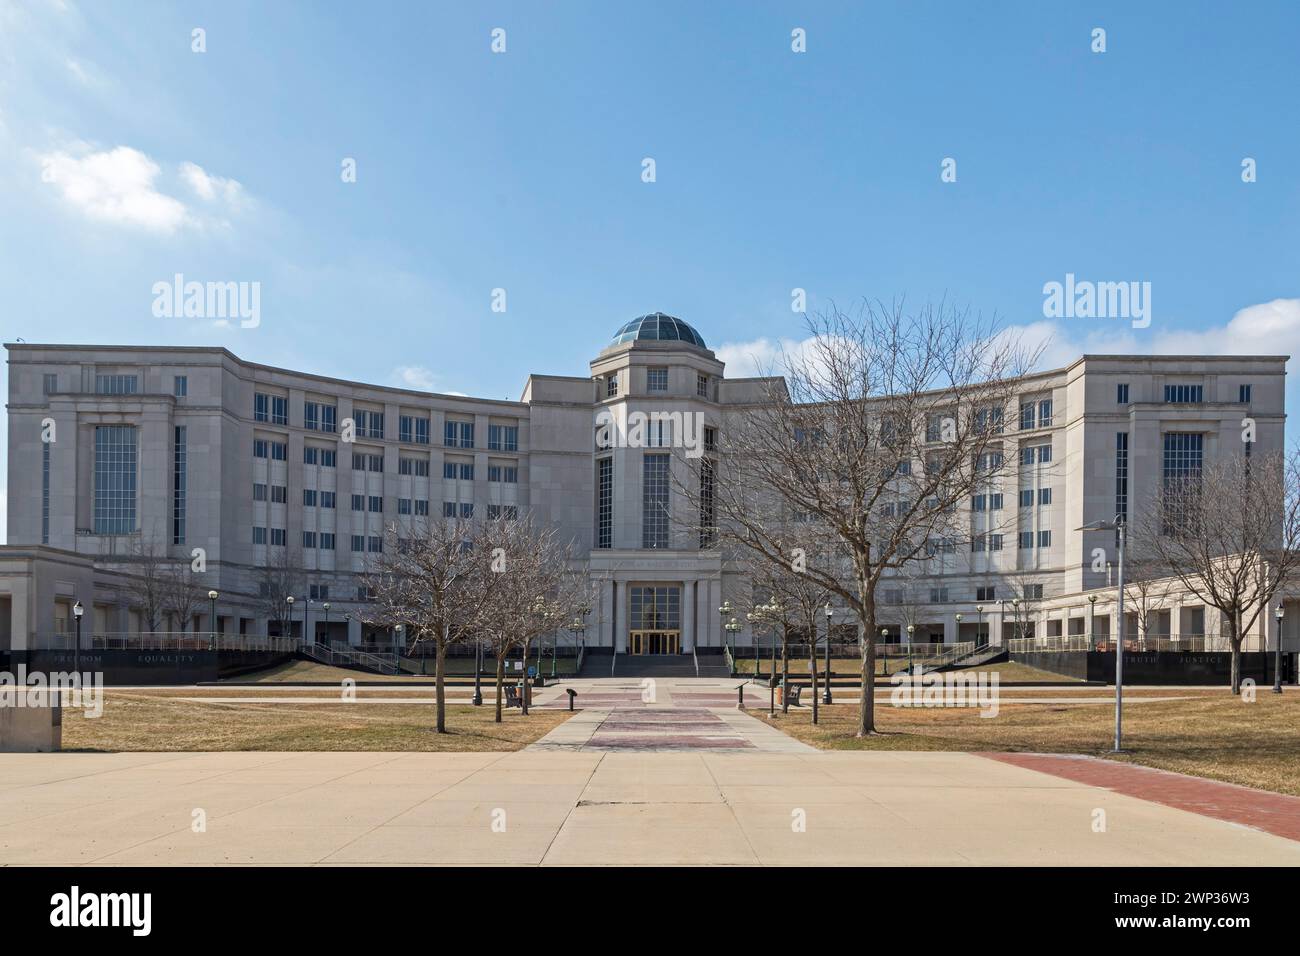 Lansing, Michigan - The Michigan Hall of Justice. The building houses the Michigan Supreme Court and other courts. Stock Photo